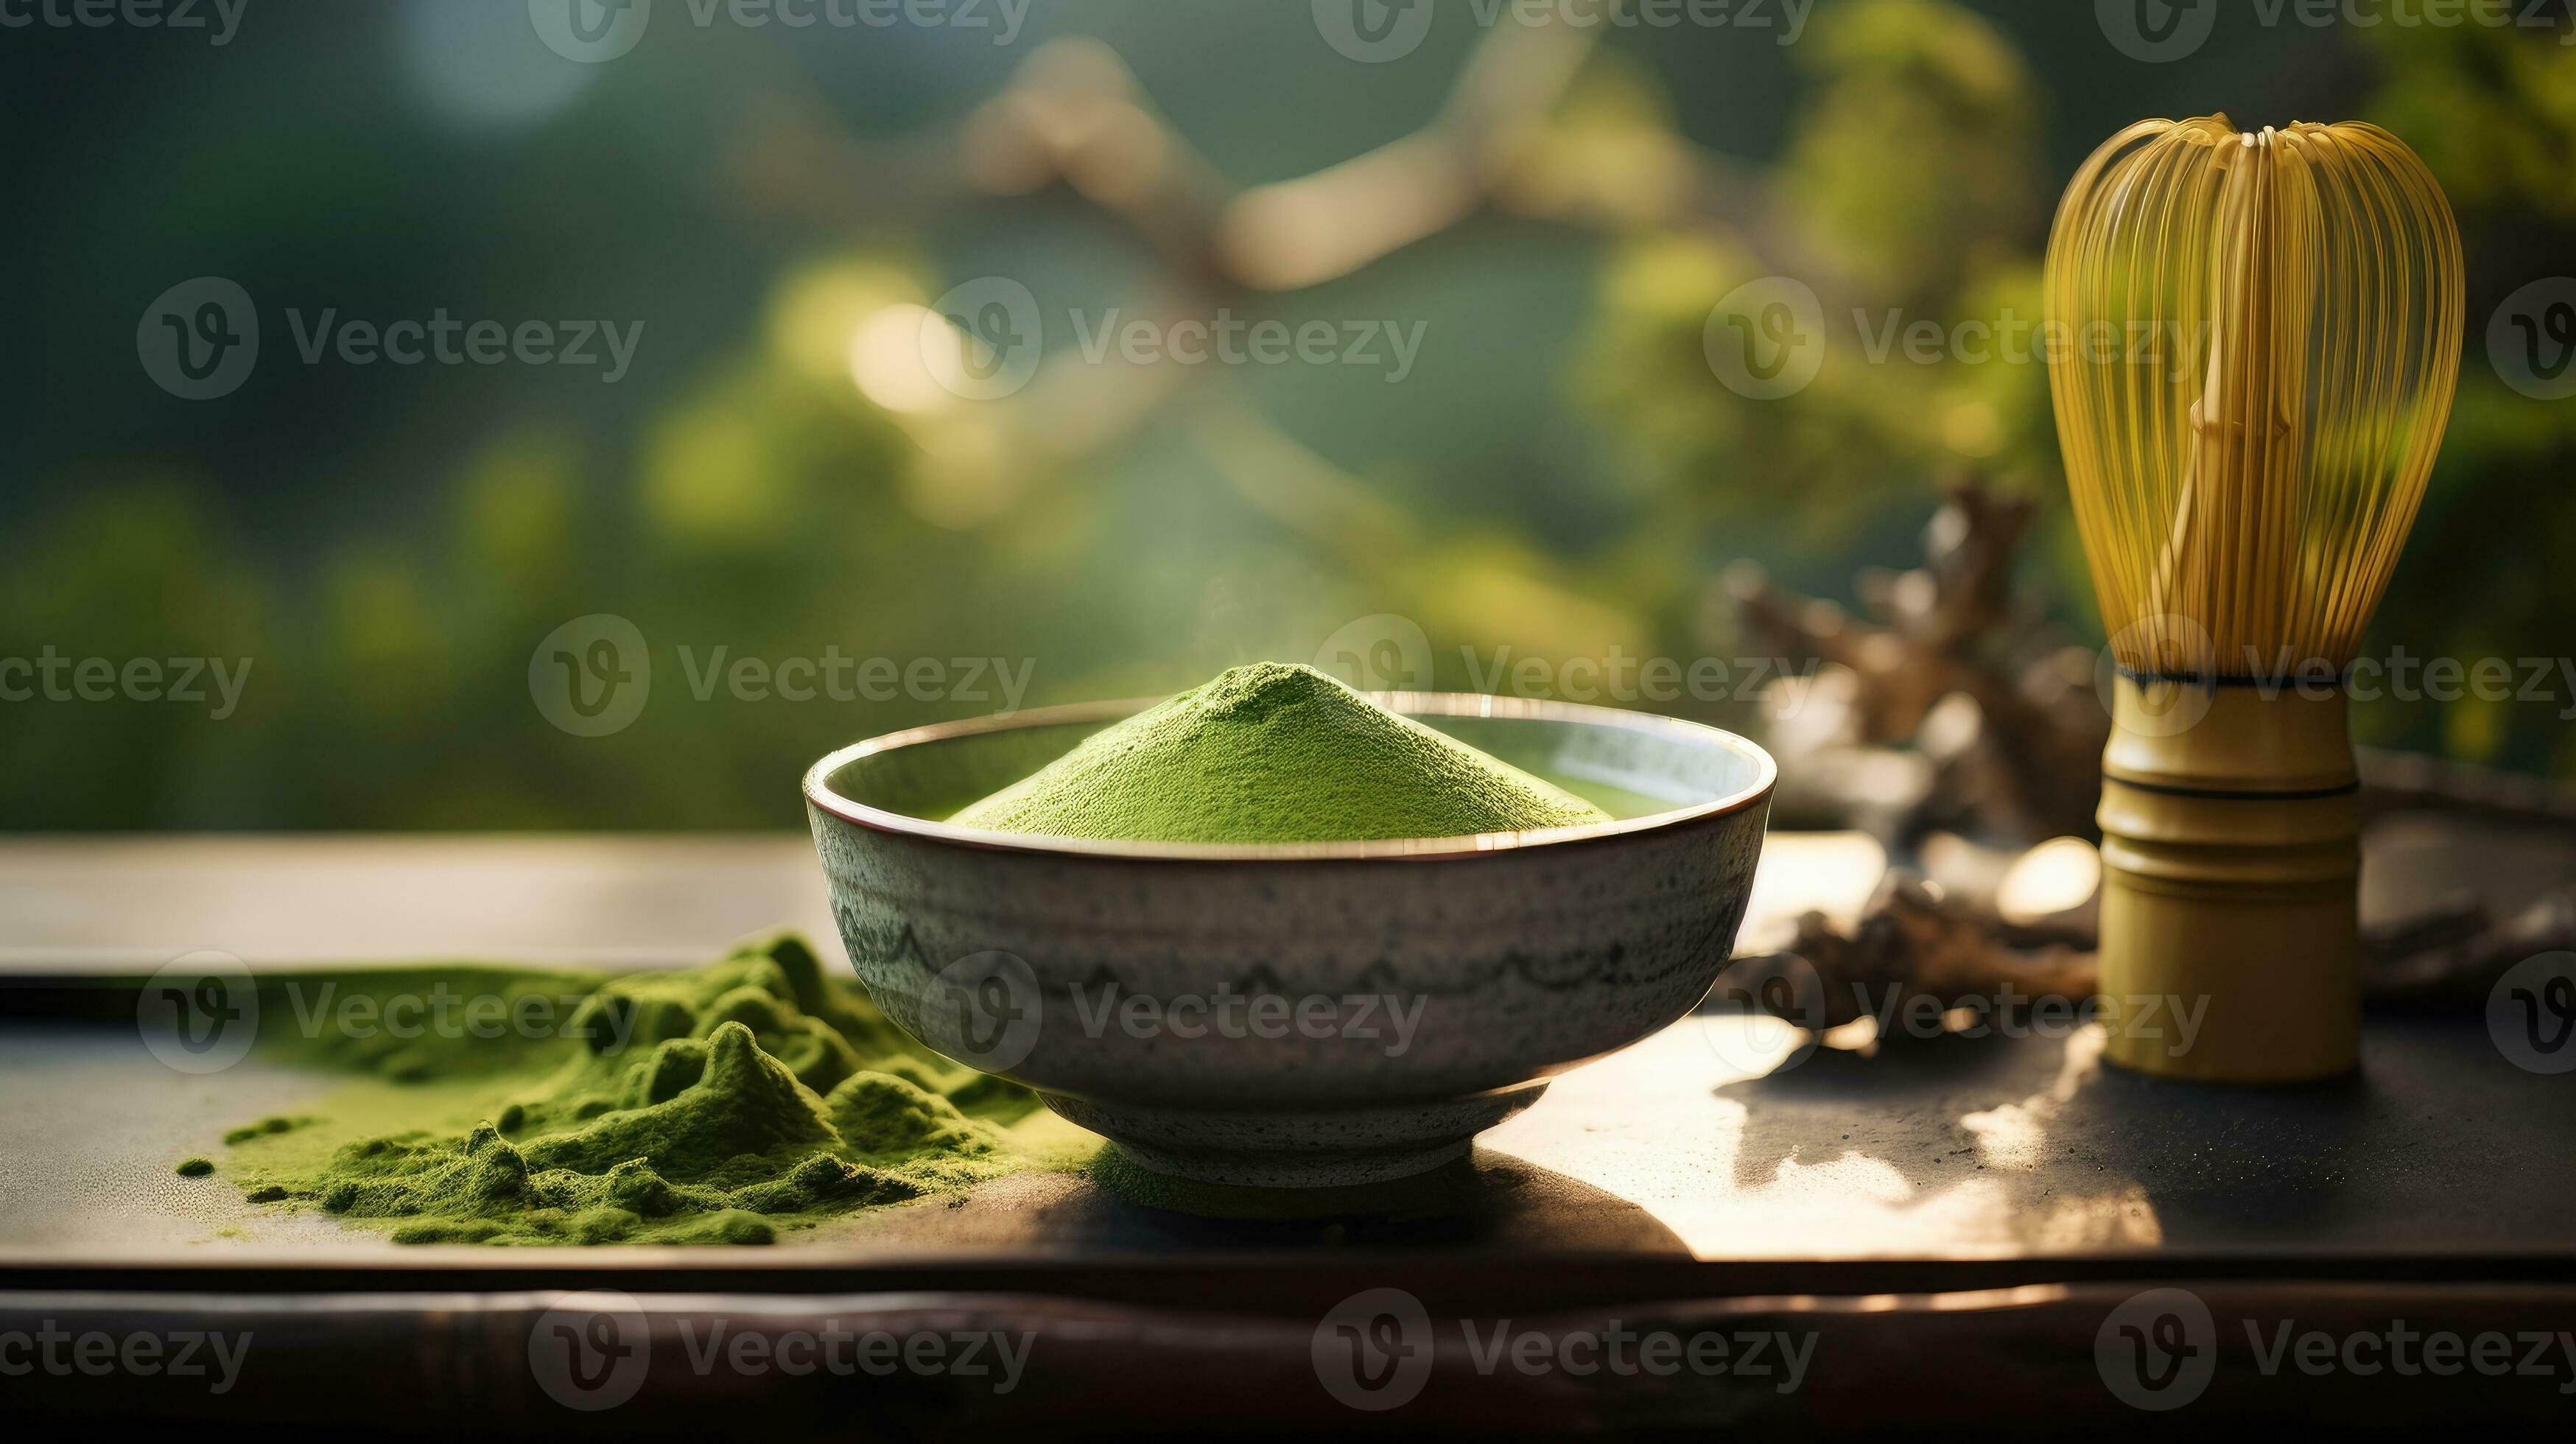 https://static.vecteezy.com/system/resources/previews/028/545/518/large_2x/traditional-japanese-matcha-raw-green-organic-matcha-powder-for-brewing-tea-a-healthy-aromatic-drink-for-long-livers-a-bowl-of-matcha-and-a-whisk-on-a-tray-place-for-text-ai-generated-photo.jpeg